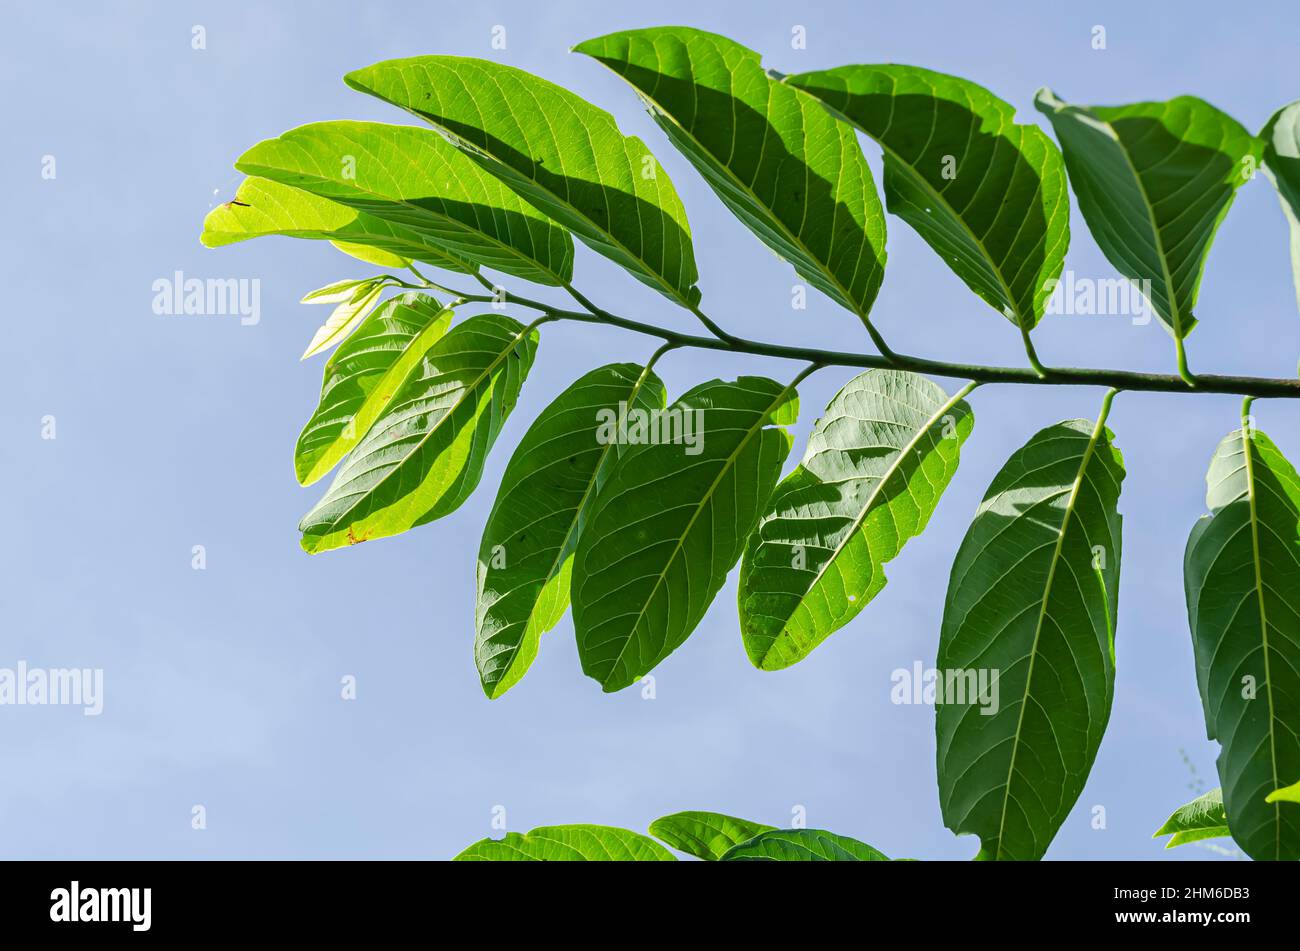 Branch Of Sweetsop Leaves Stock Photo